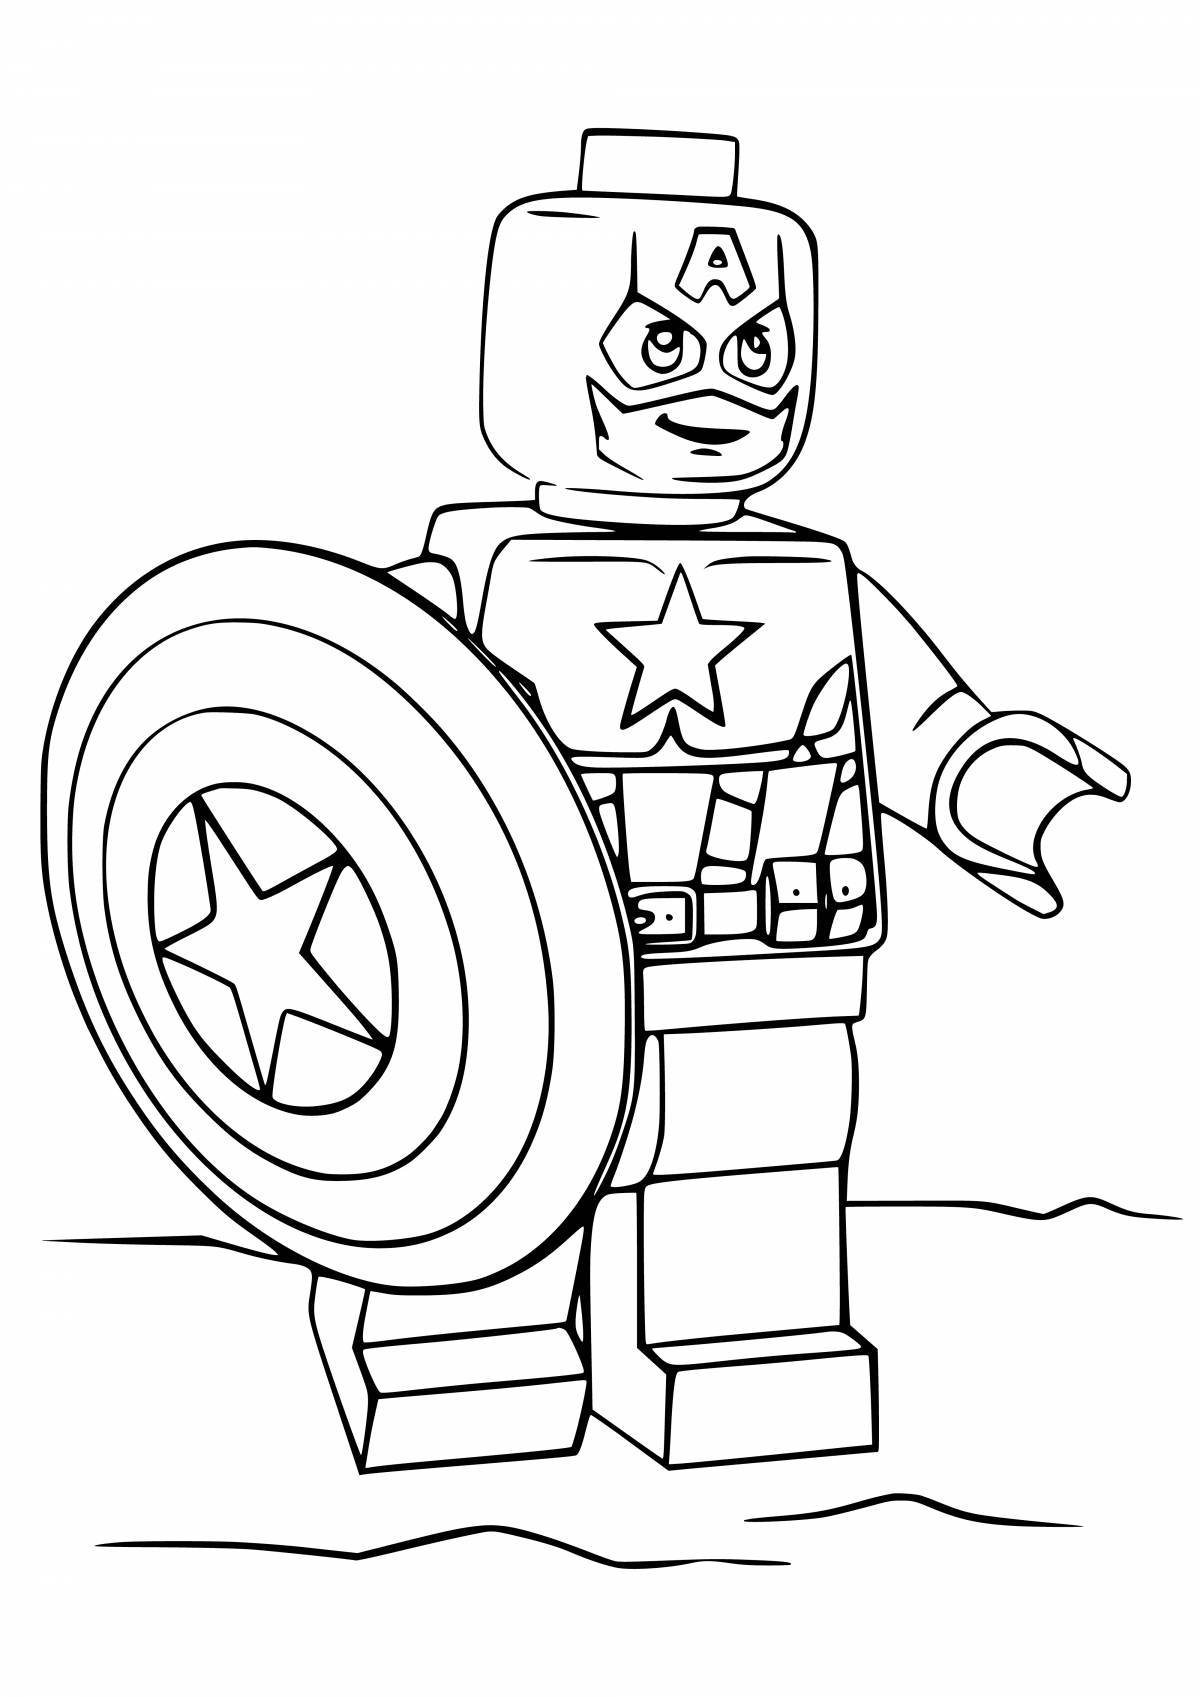 Coloring page royal captain america